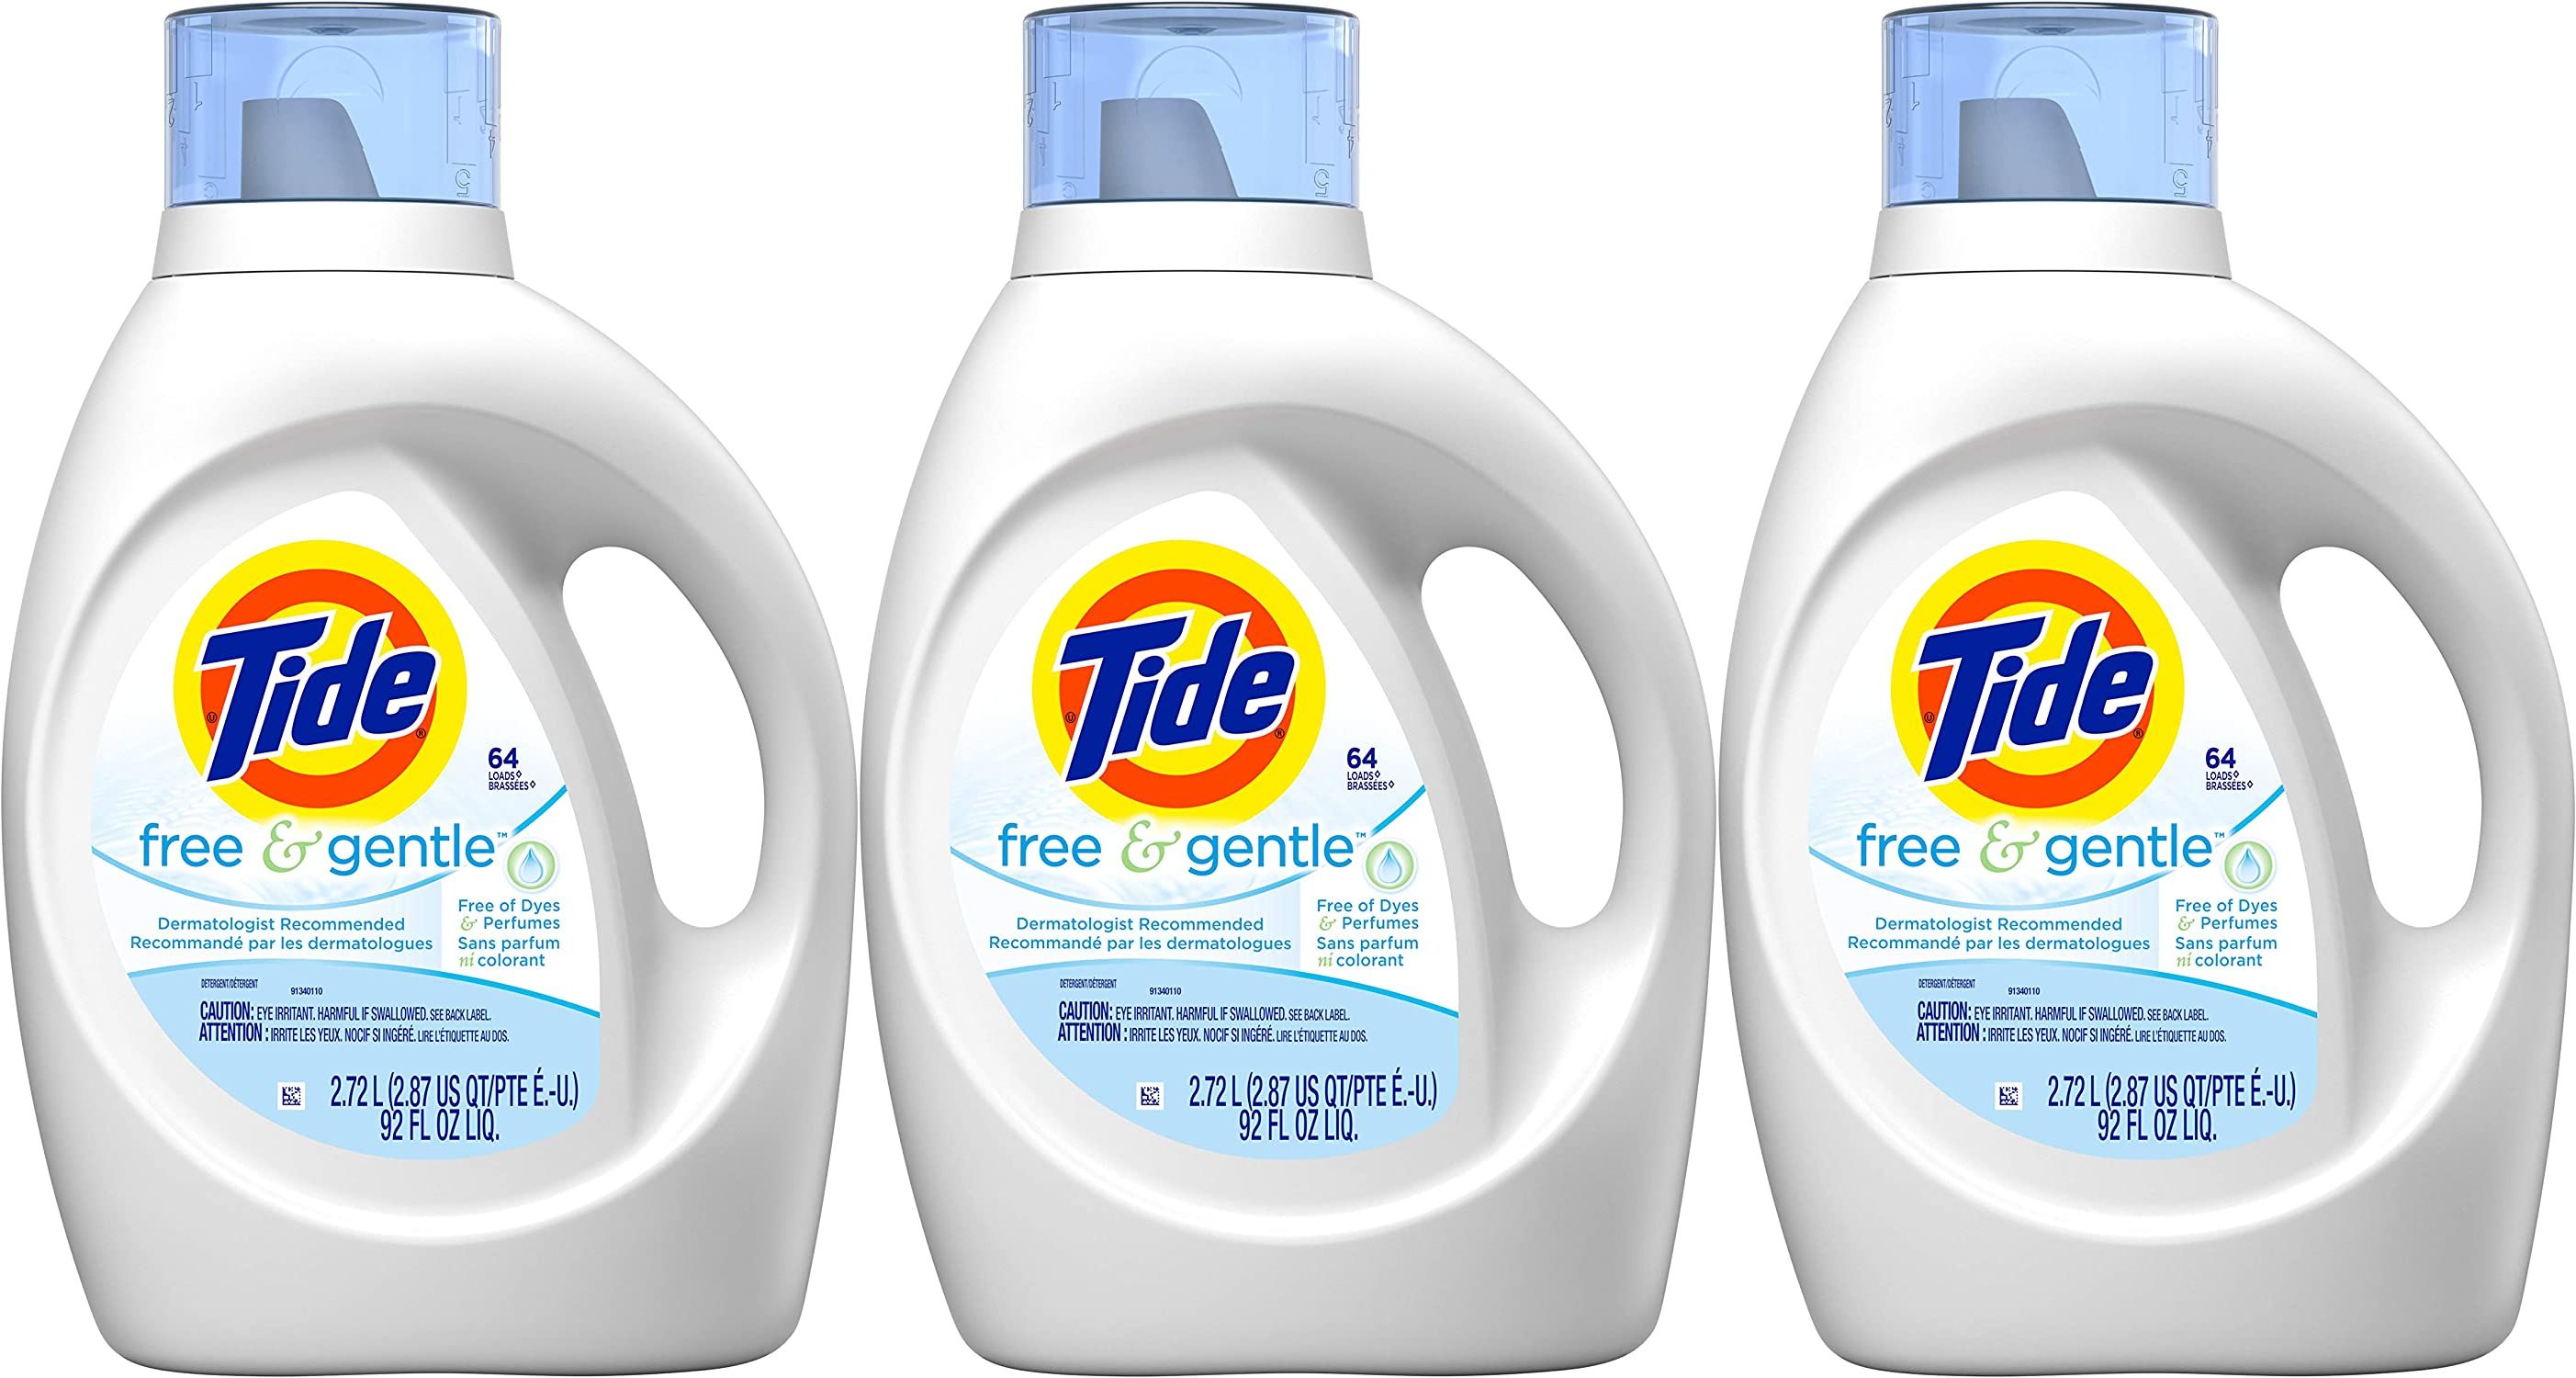 Tide Liquid Laundry Detergent: 92-Oz Tide Free & Gentle, 92-Oz Tide w/Downy, or 69-Oz Tide Purclean Plant-Based 3 For $27 ($9 Each) w/S&S + Free Shipping